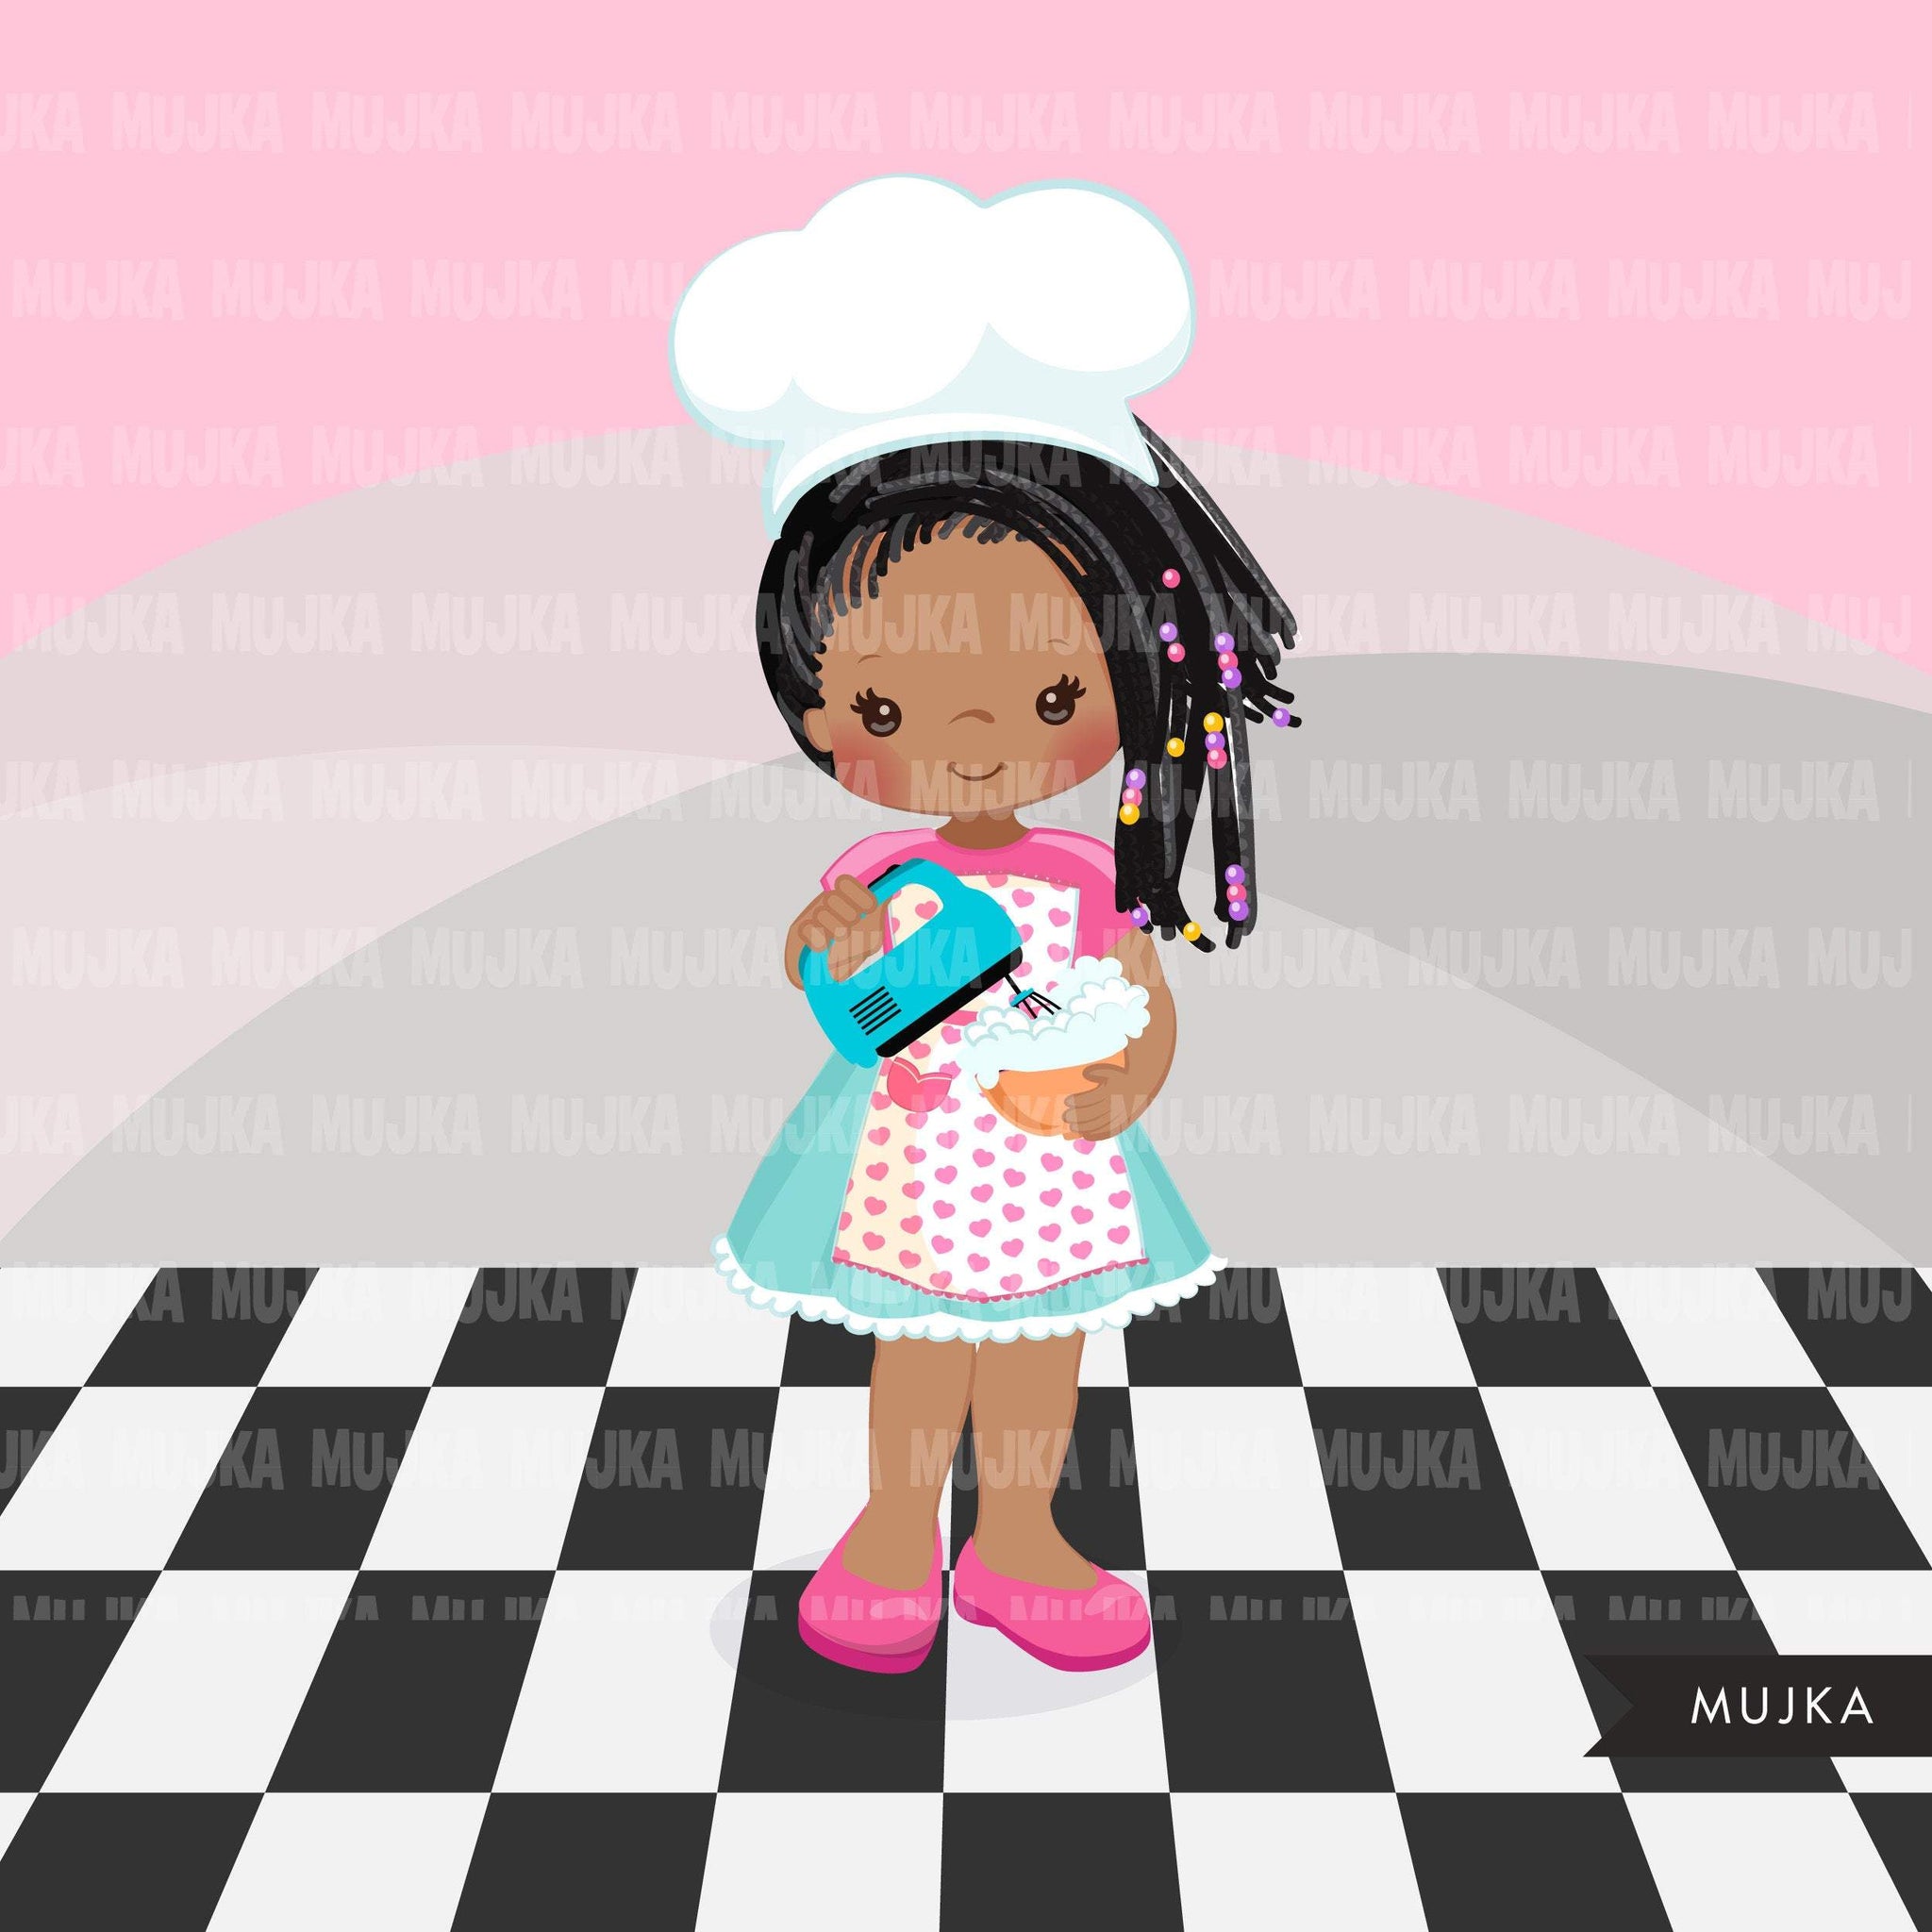 Baking Clipart, Cute black afro baker characters, kitchen chores, baking party, cake, spatula, pastry chef, cookie graphics, baking fun clip art